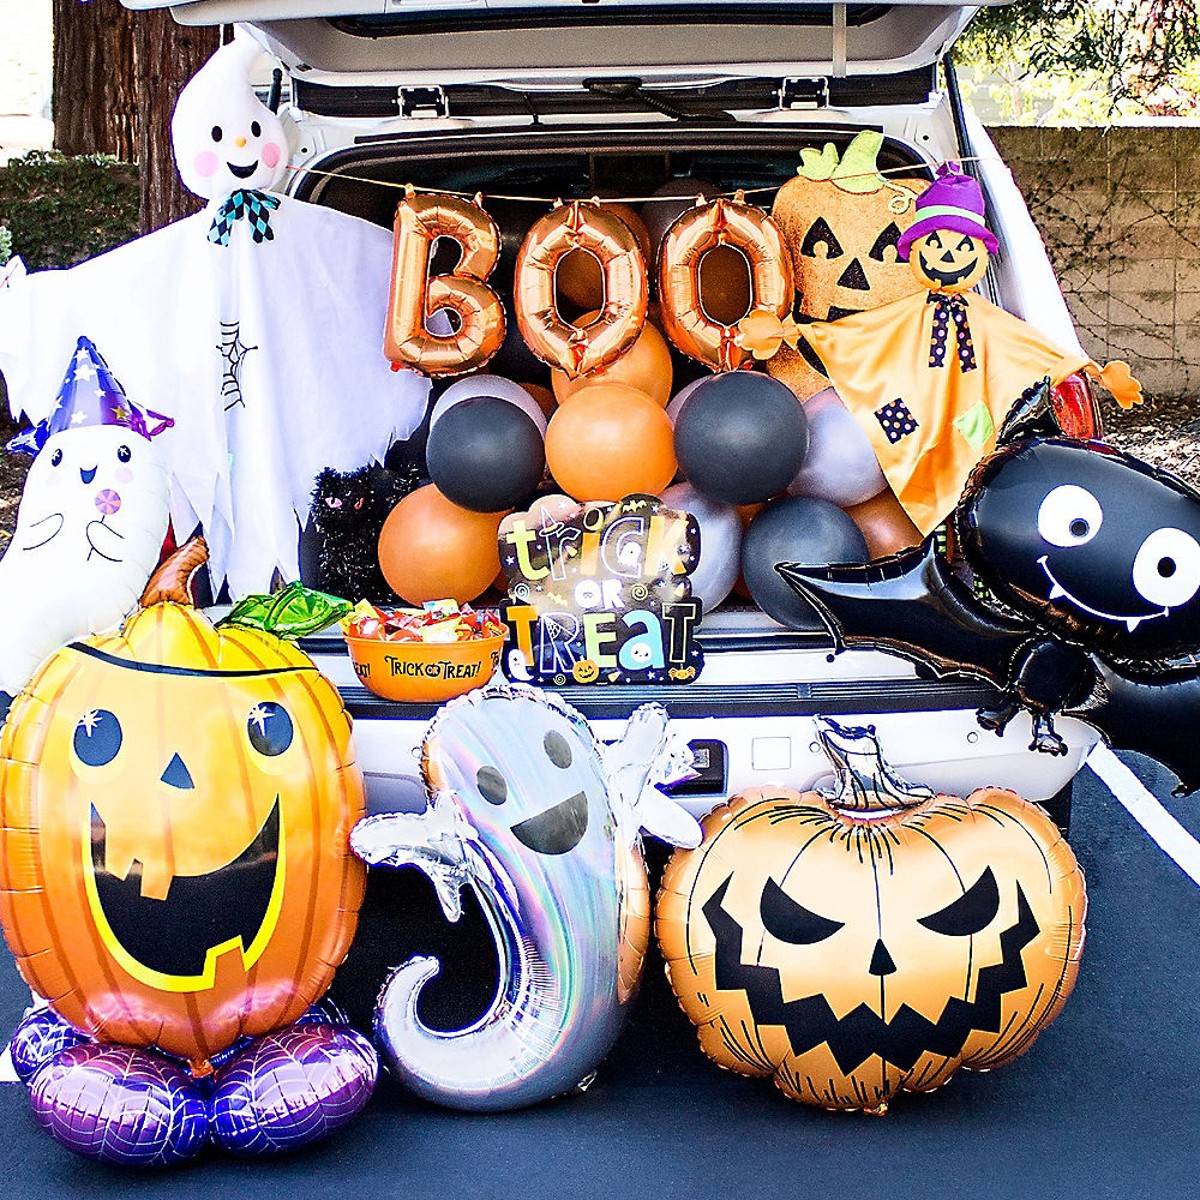 Classic Trunk or Treat Display